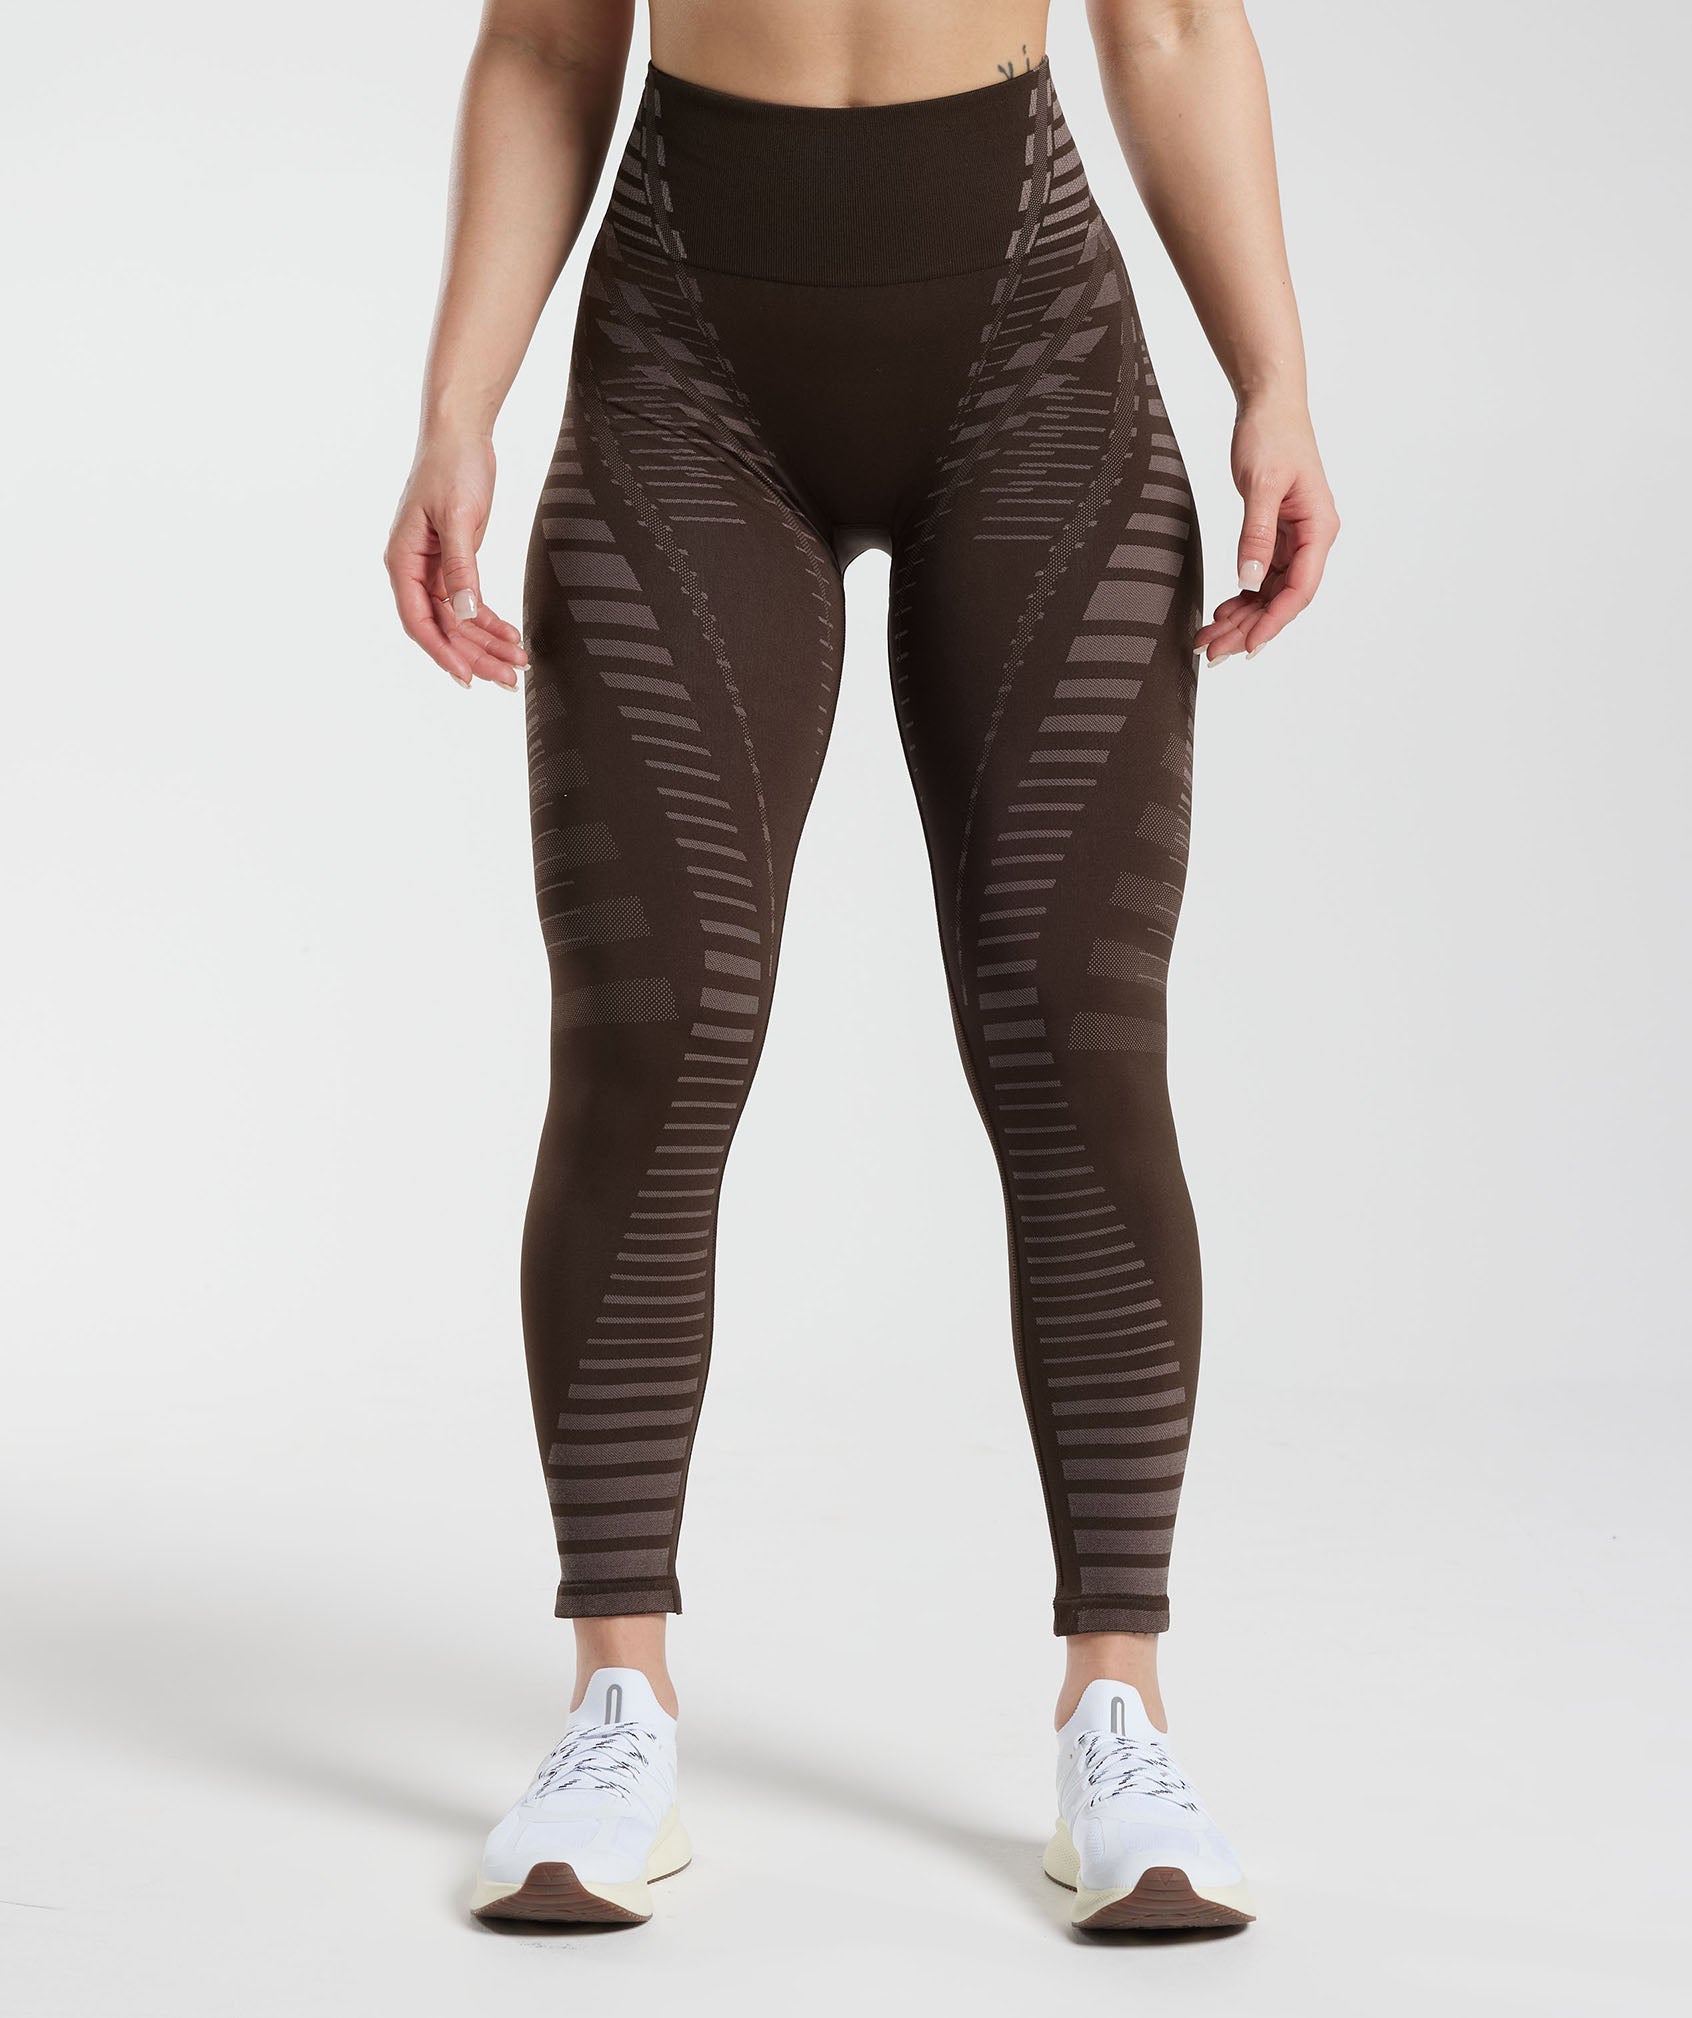 Apex Limit Leggings in Archive Brown/Truffle Brown - view 1